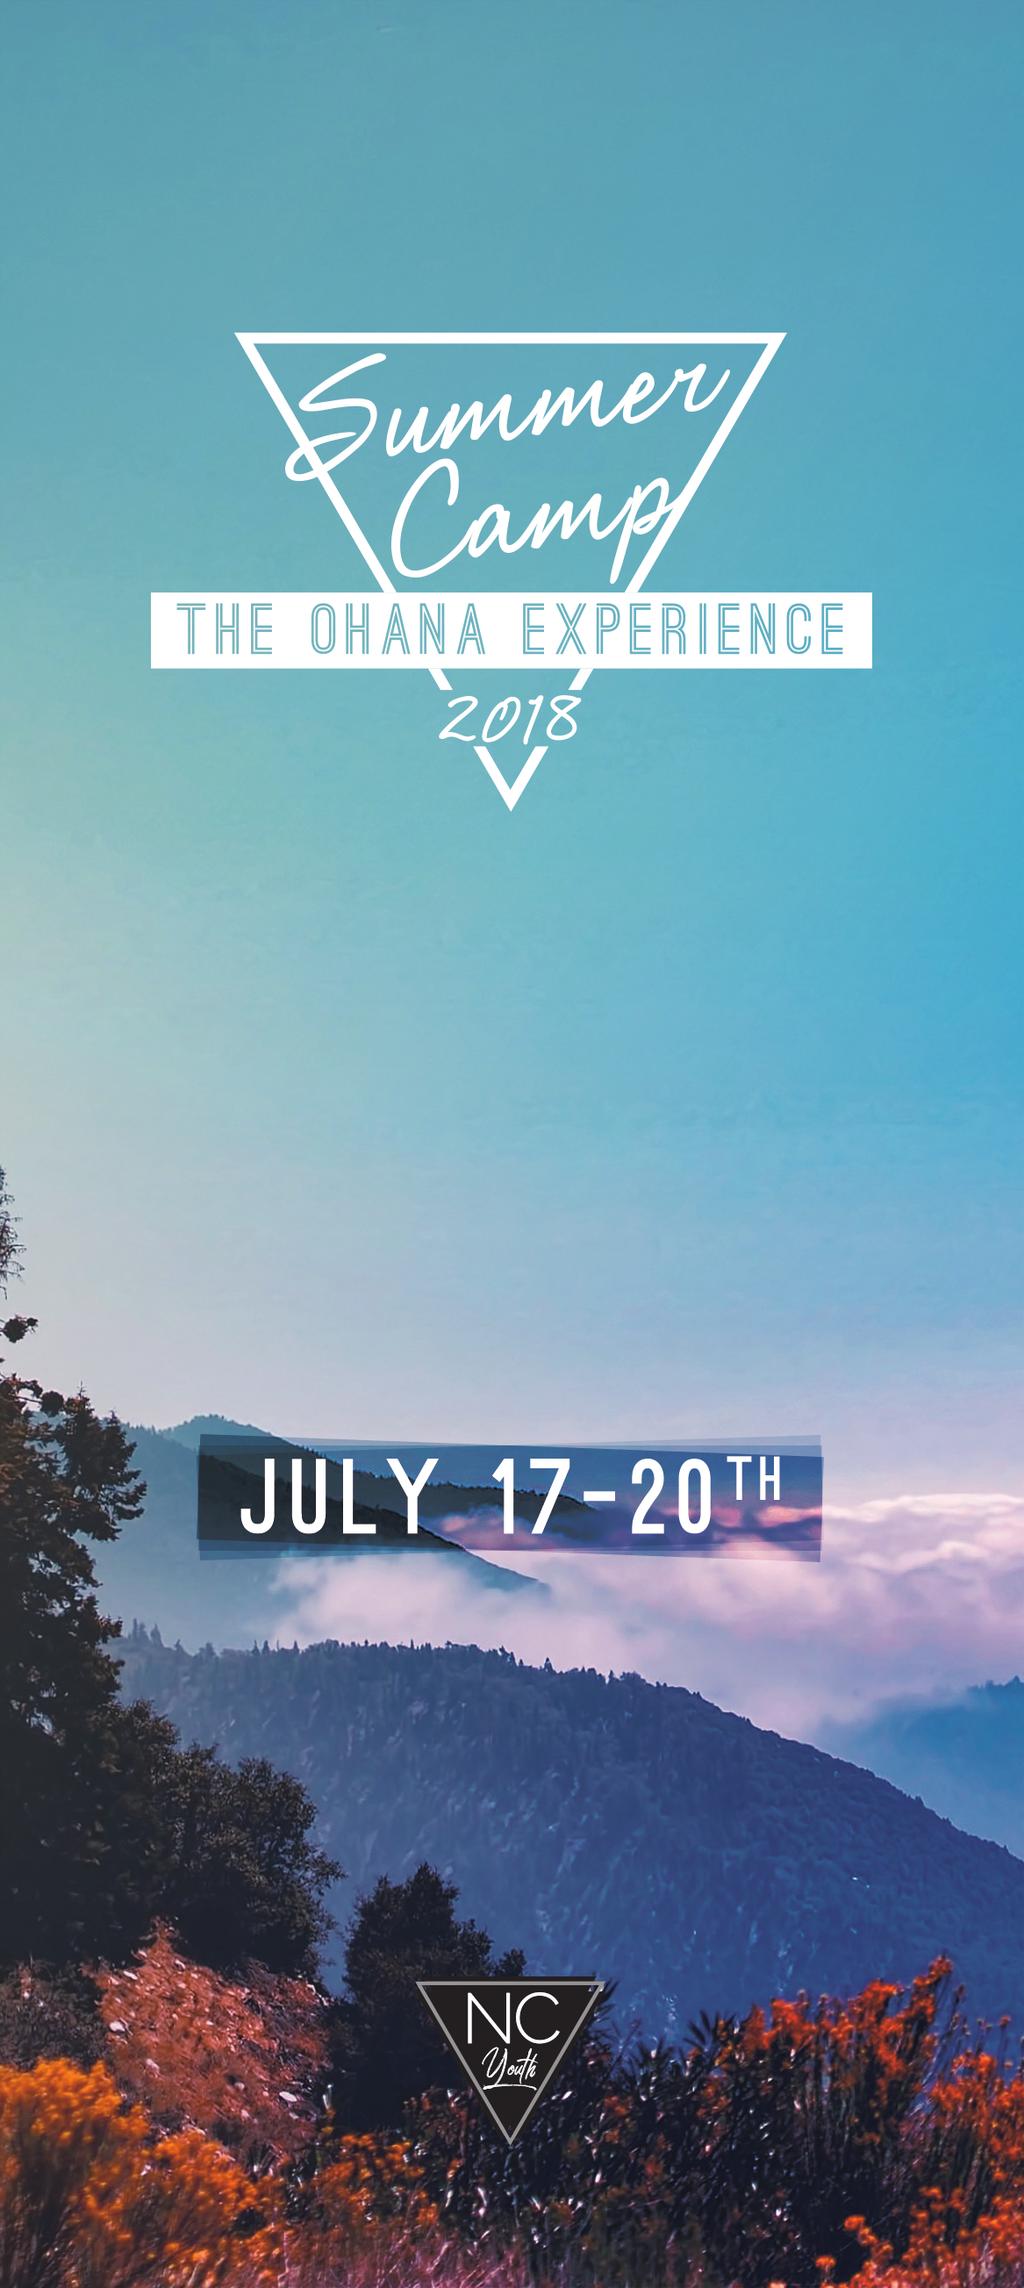 This July, the NC Assemblies of God is hosting a summer youth camp! Youth (ages 13-17) may attend The Ohana Experience Summer Camp in Black Mountain, NC.